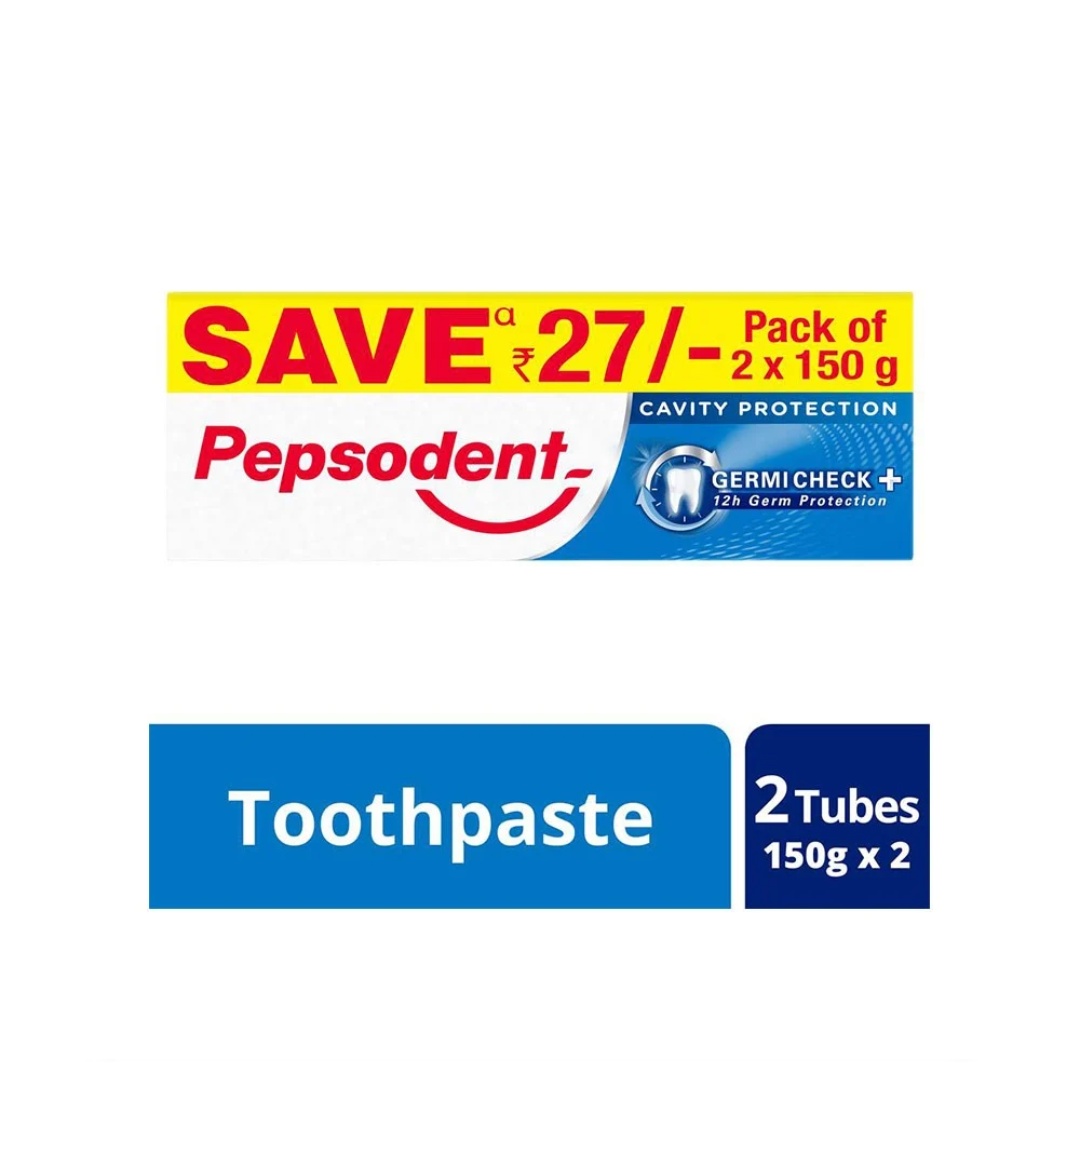 Pepsodent Germicheck Cavity Protection Toothpaste, 2x150 gm